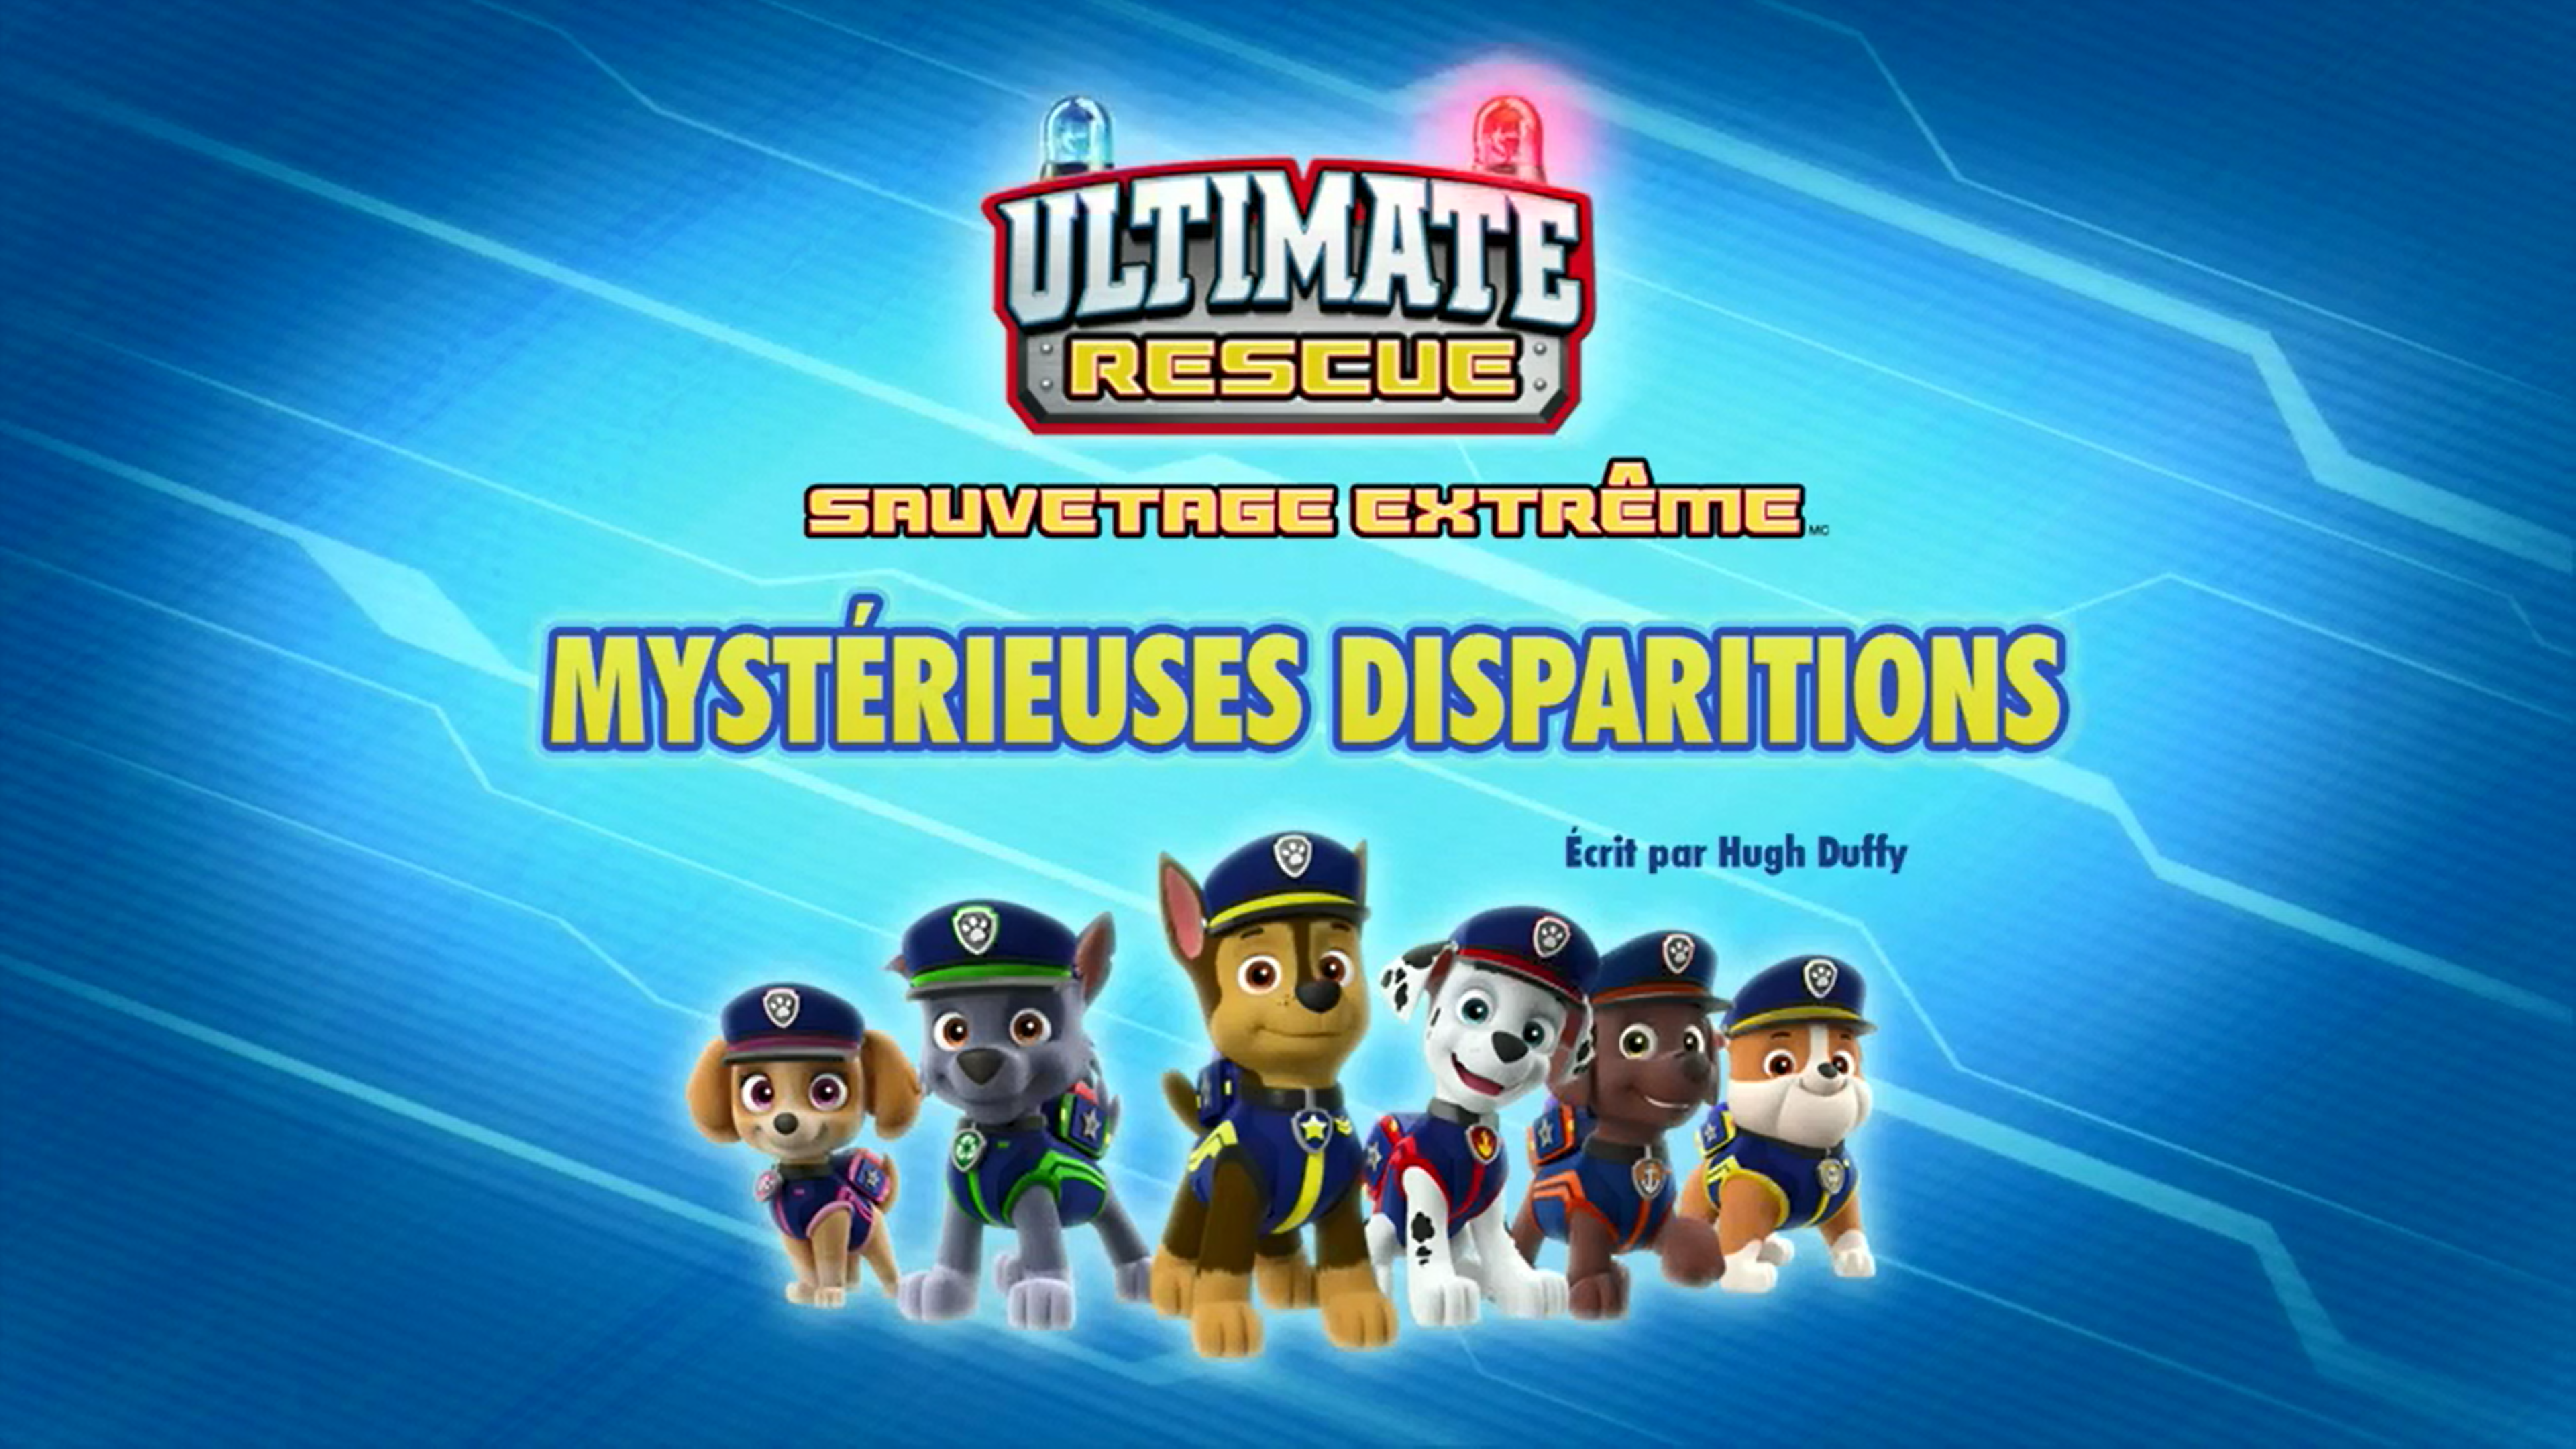 chase ultimate rescue paw patrol